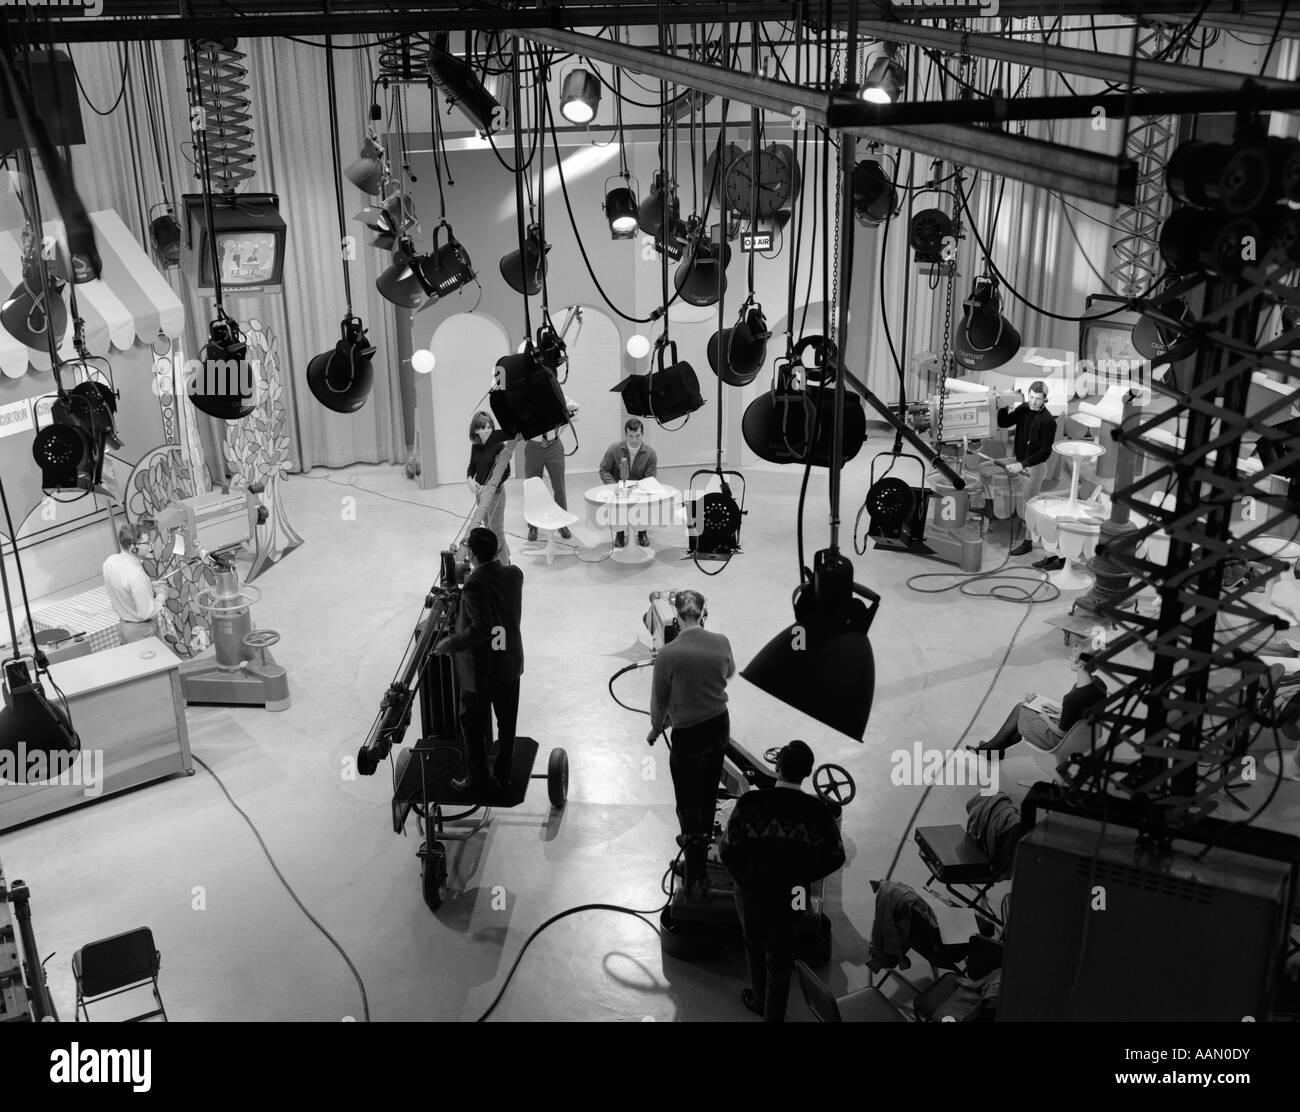 1960s BEHIND-THE-SCENES FILMING OF TV TALK SHOW IN STUDIO WITH SEVERAL LIGHT FIXTURES AND MONITORS HANGING FROM CEILING Stock Photo